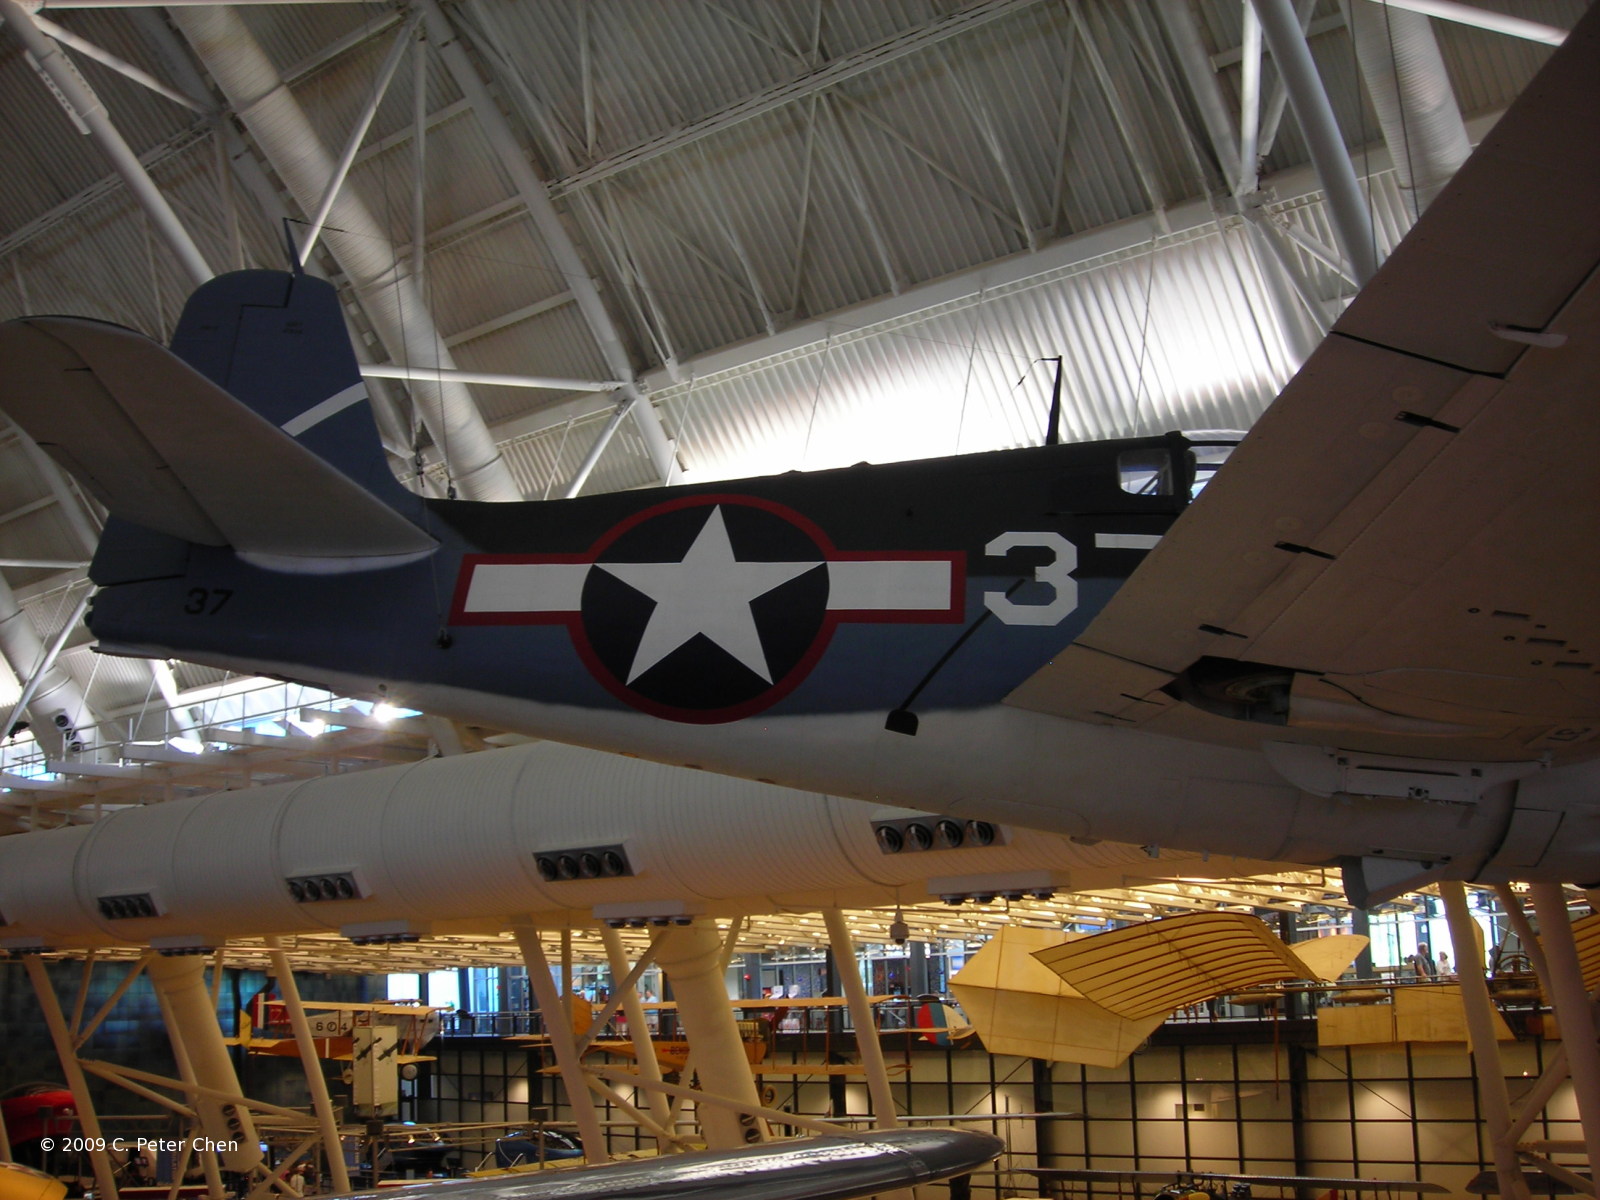 F6F-3 Hellcat fighter on display at the Smithsonian Air and Space Museum Udvar-Hazy Center, Chantilly, Virginia, United States, 26 Apr 2009, photo 3 of 4